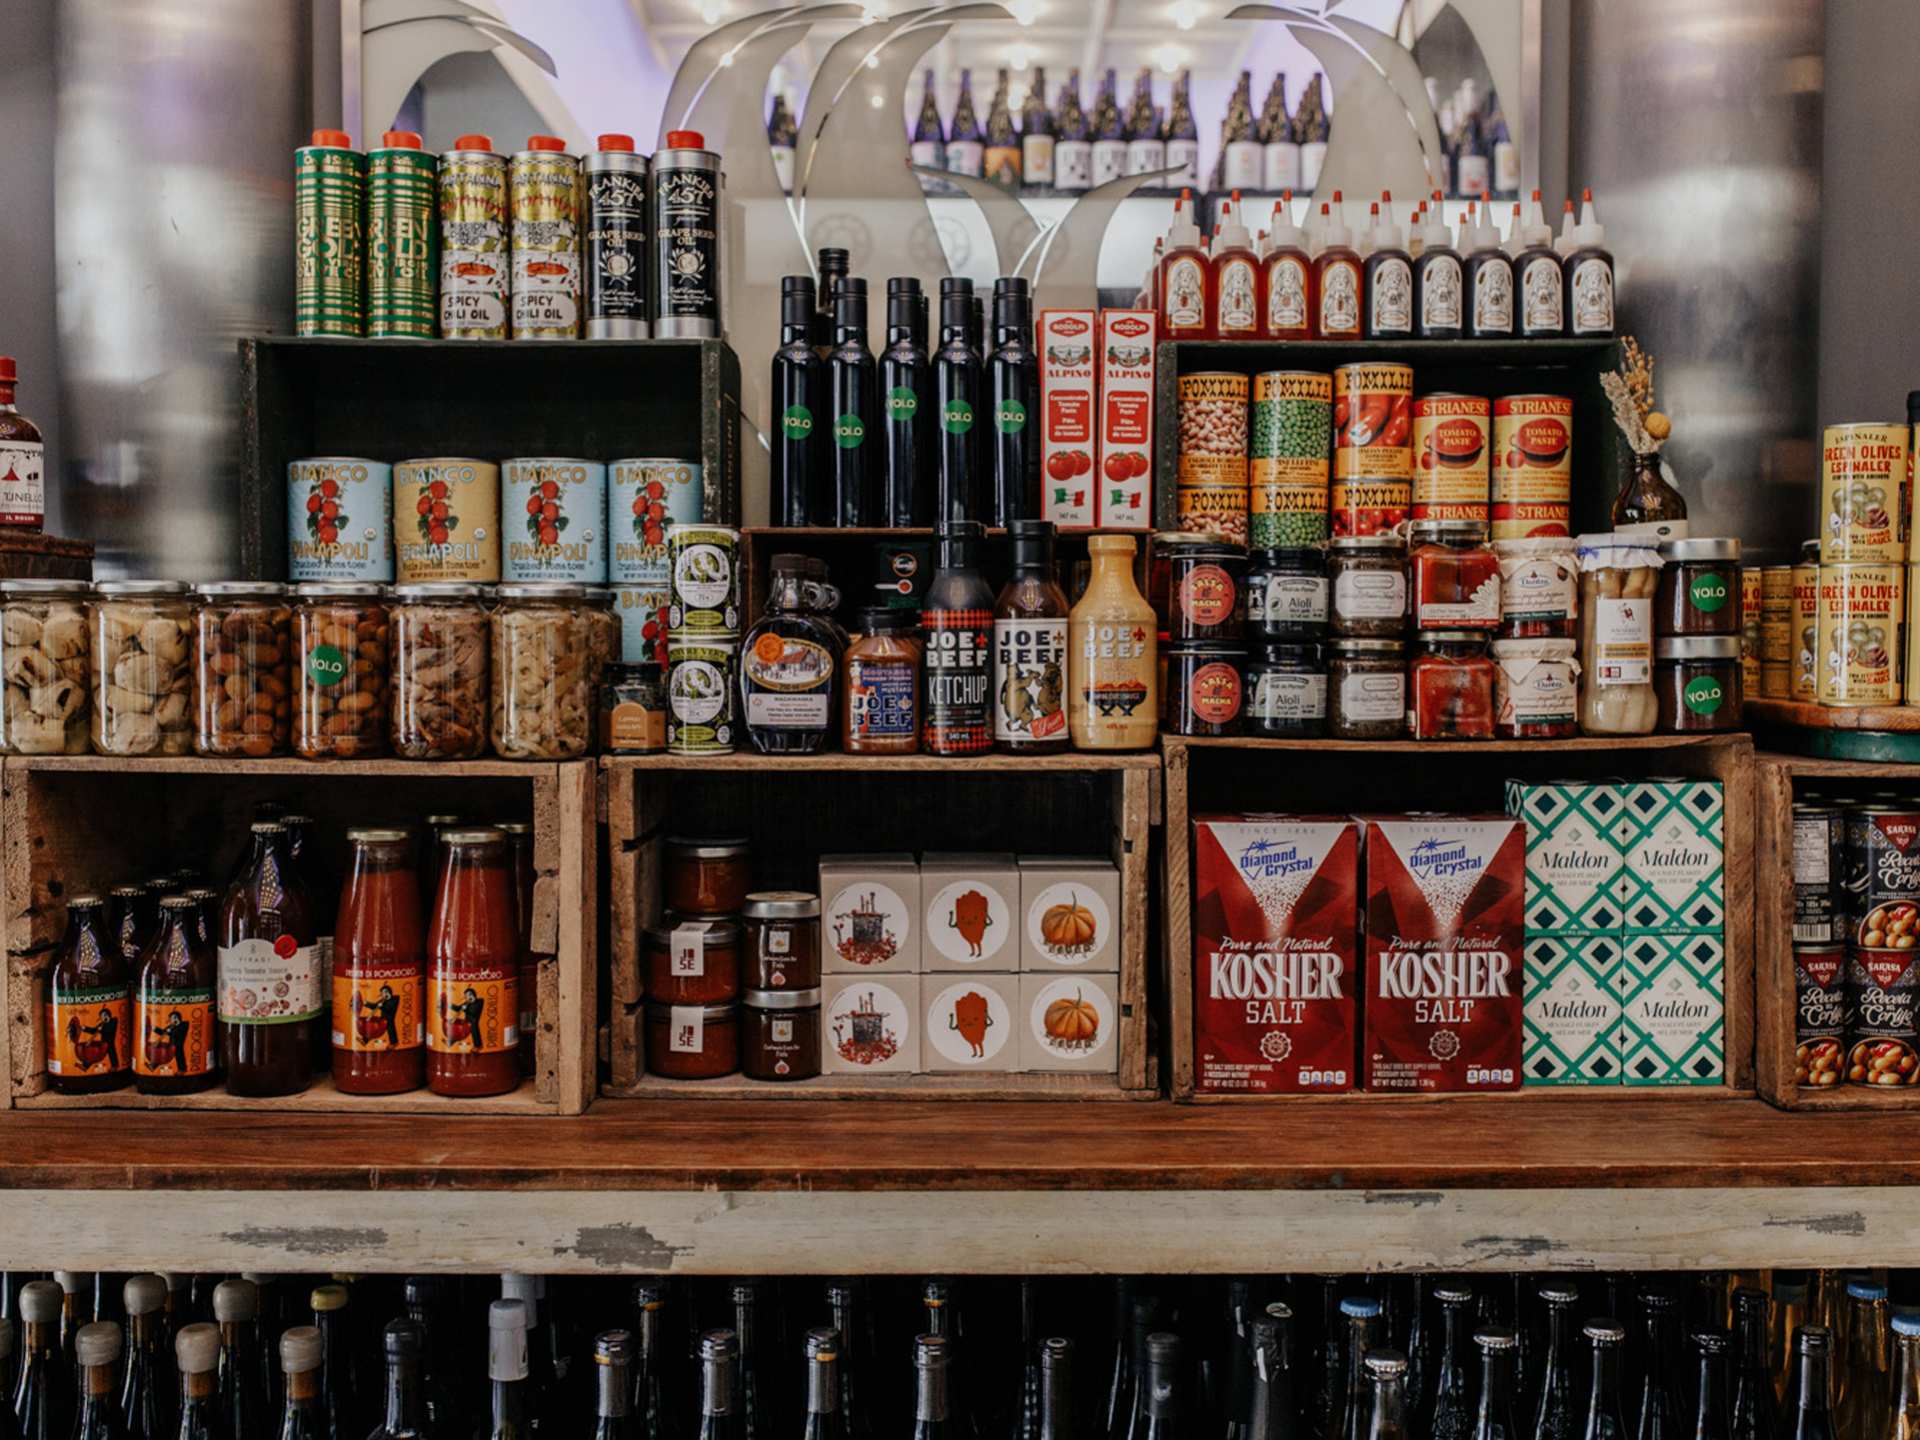 Toronto bottle shops and alcohol stores | Cans, jars and other pantry items on shelves at Bottega Volo in Littly Italy, Toronto